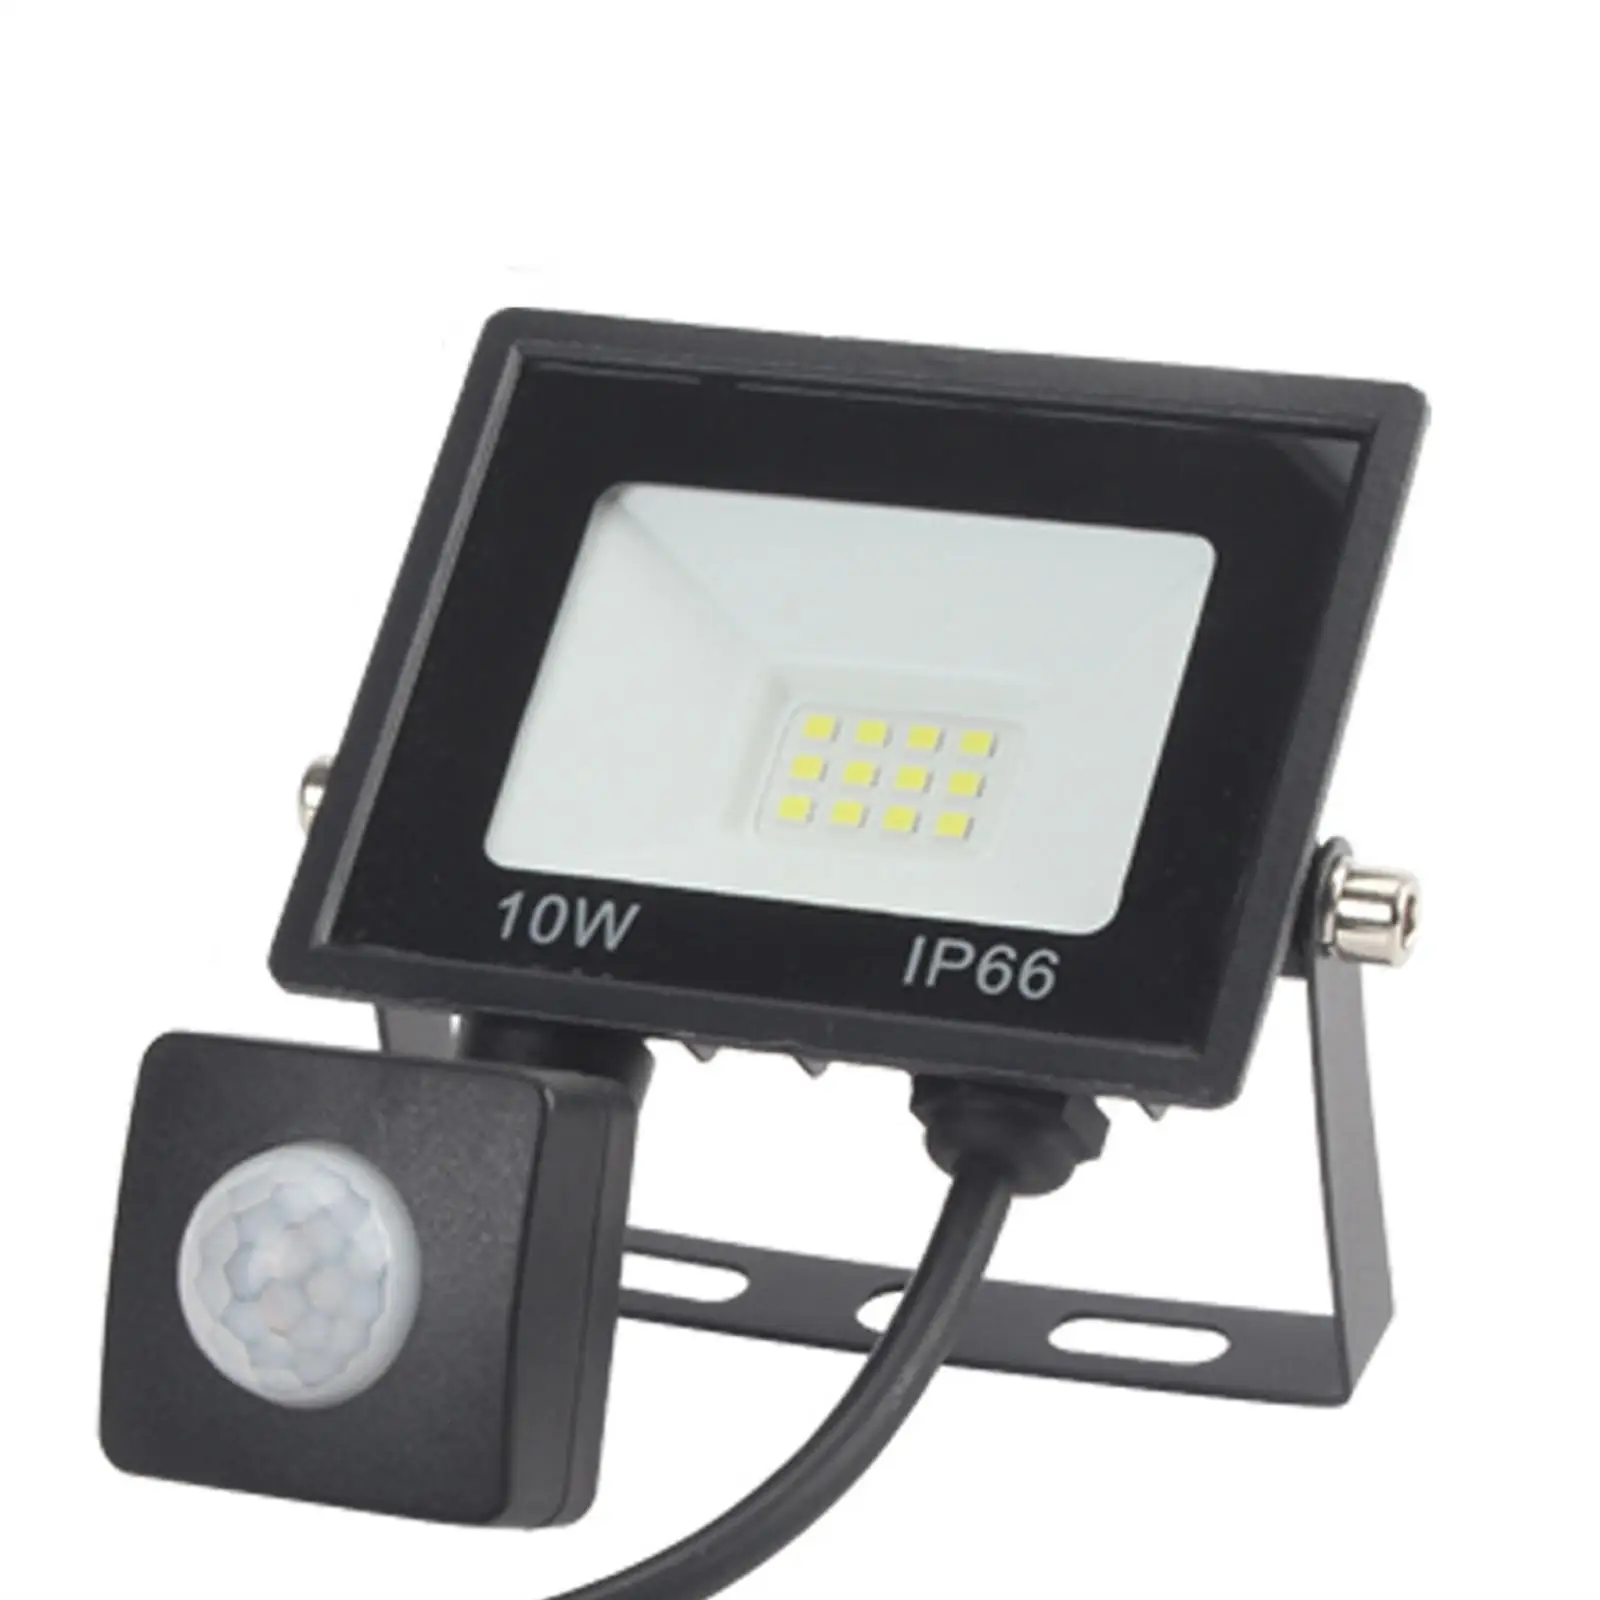 

LED Floodlight Induction Style 10W 20W 30W 50W 100W Motion Sensor Ip66 Cold White Light Human Body Induction Water Proof Lamp